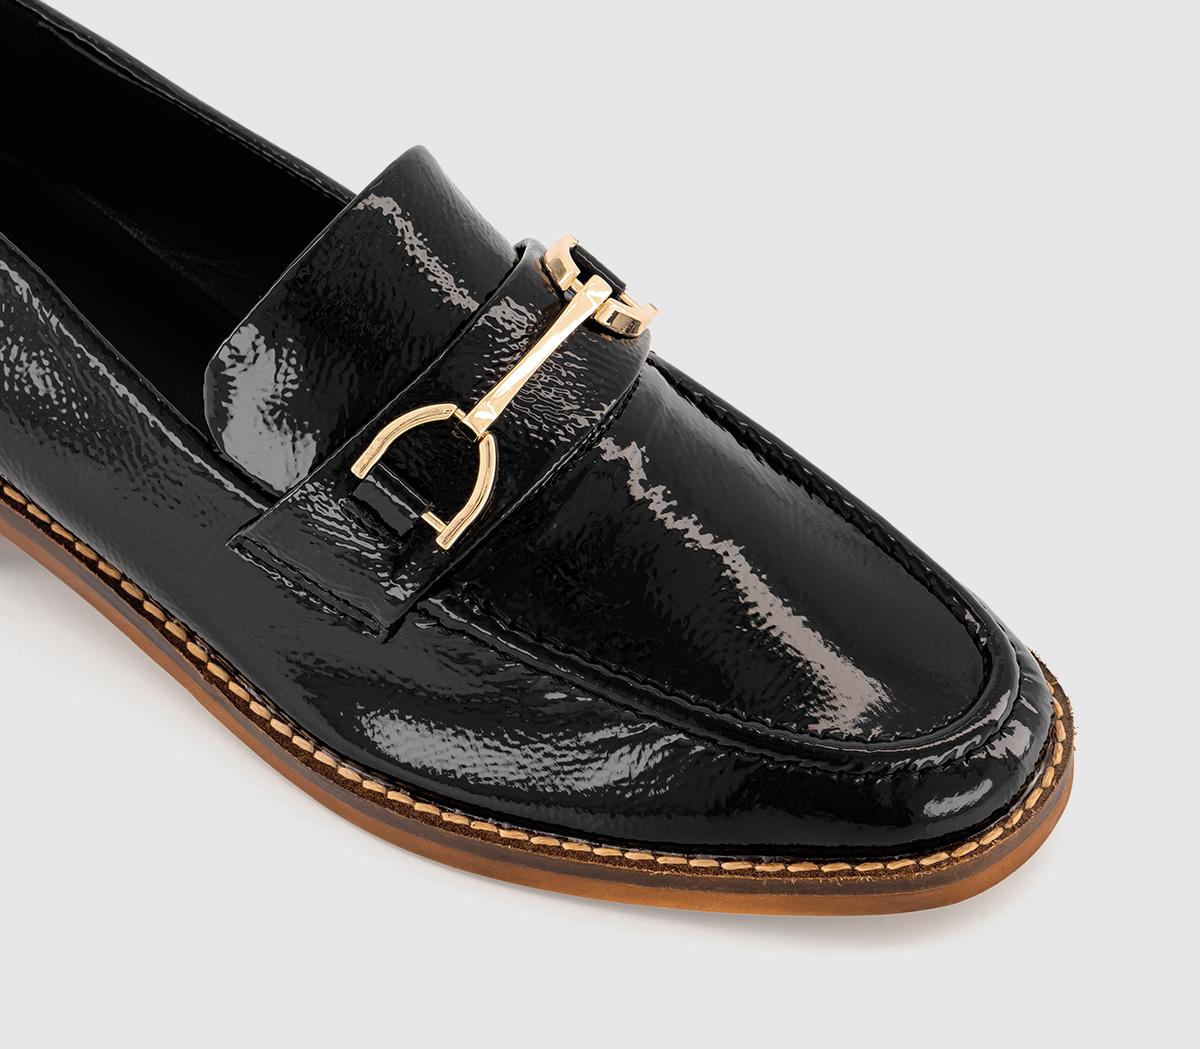 OFFICE Flair Patent Leather Heel Loafers Black Crinkle Patent - Flat ...